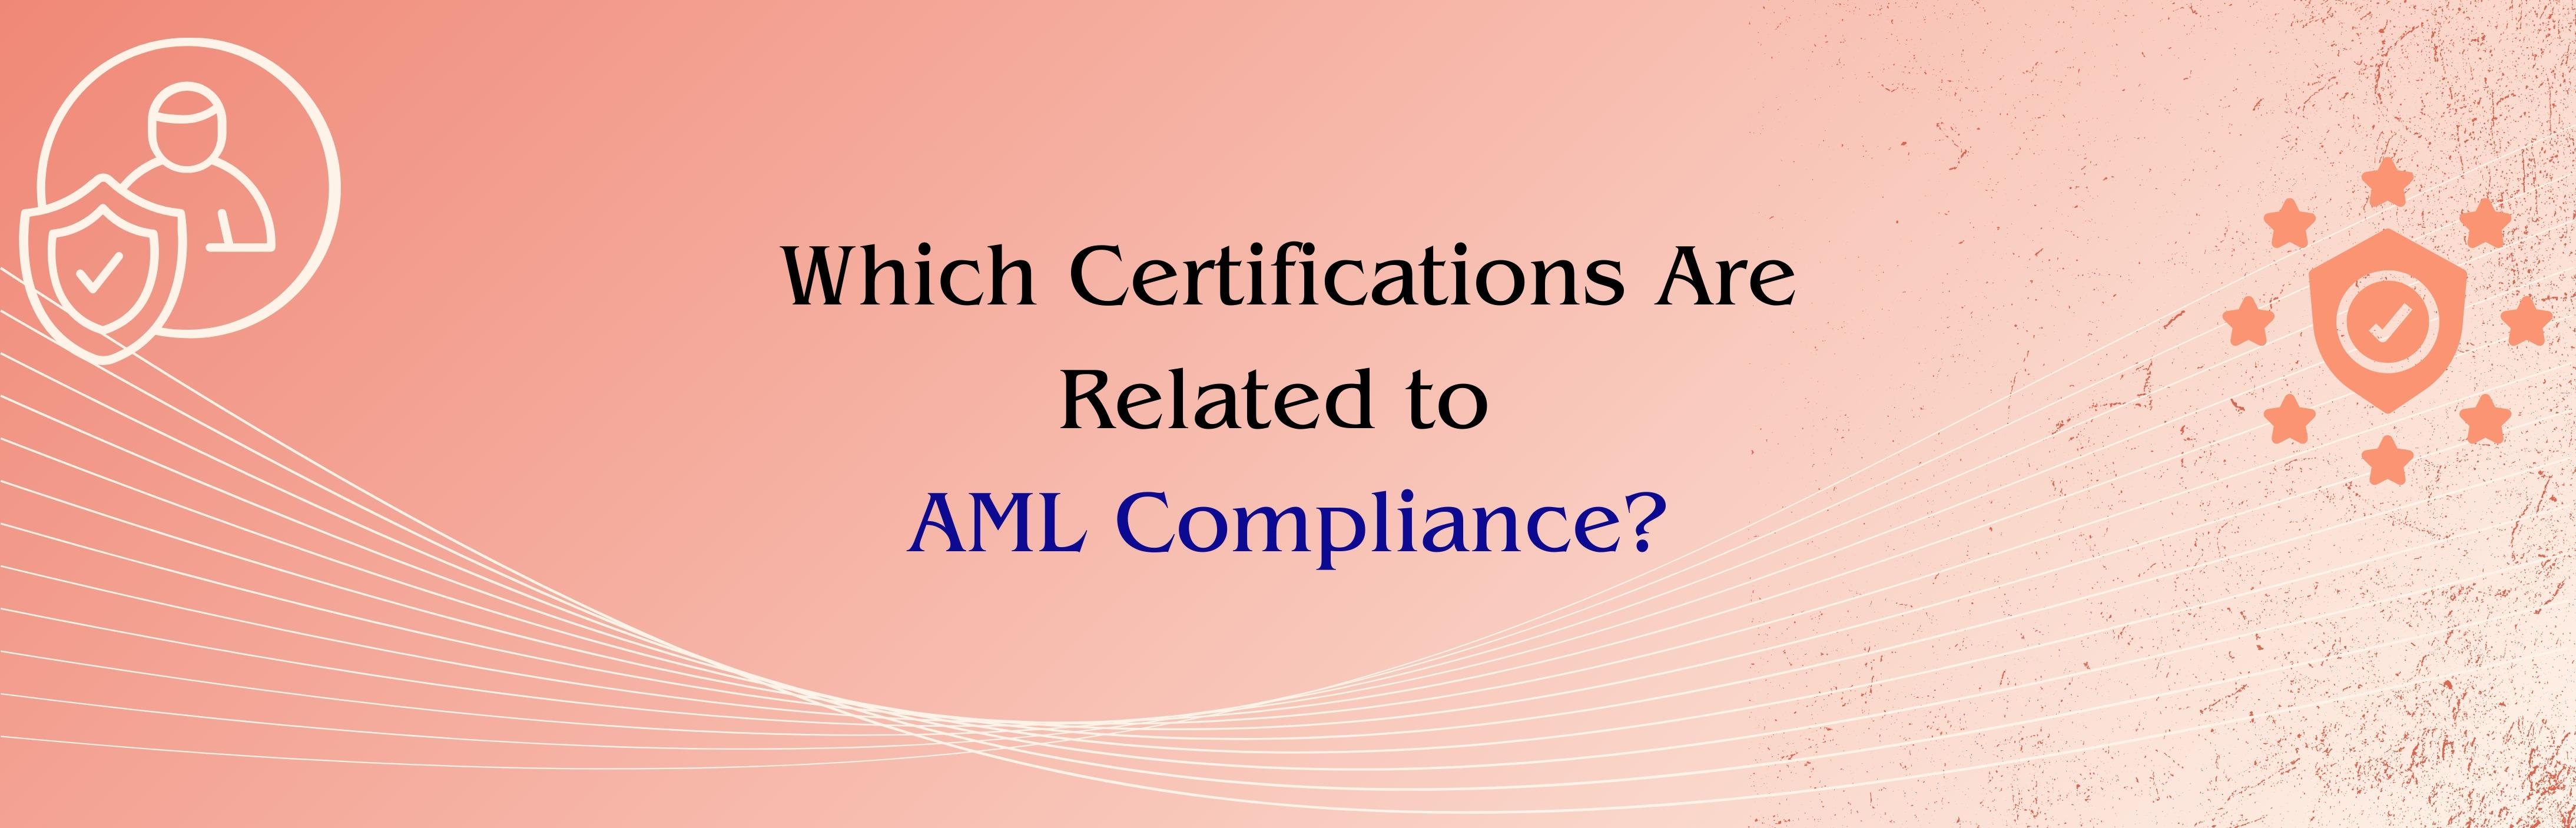 Which Certifications Are Related to AML Compliance?